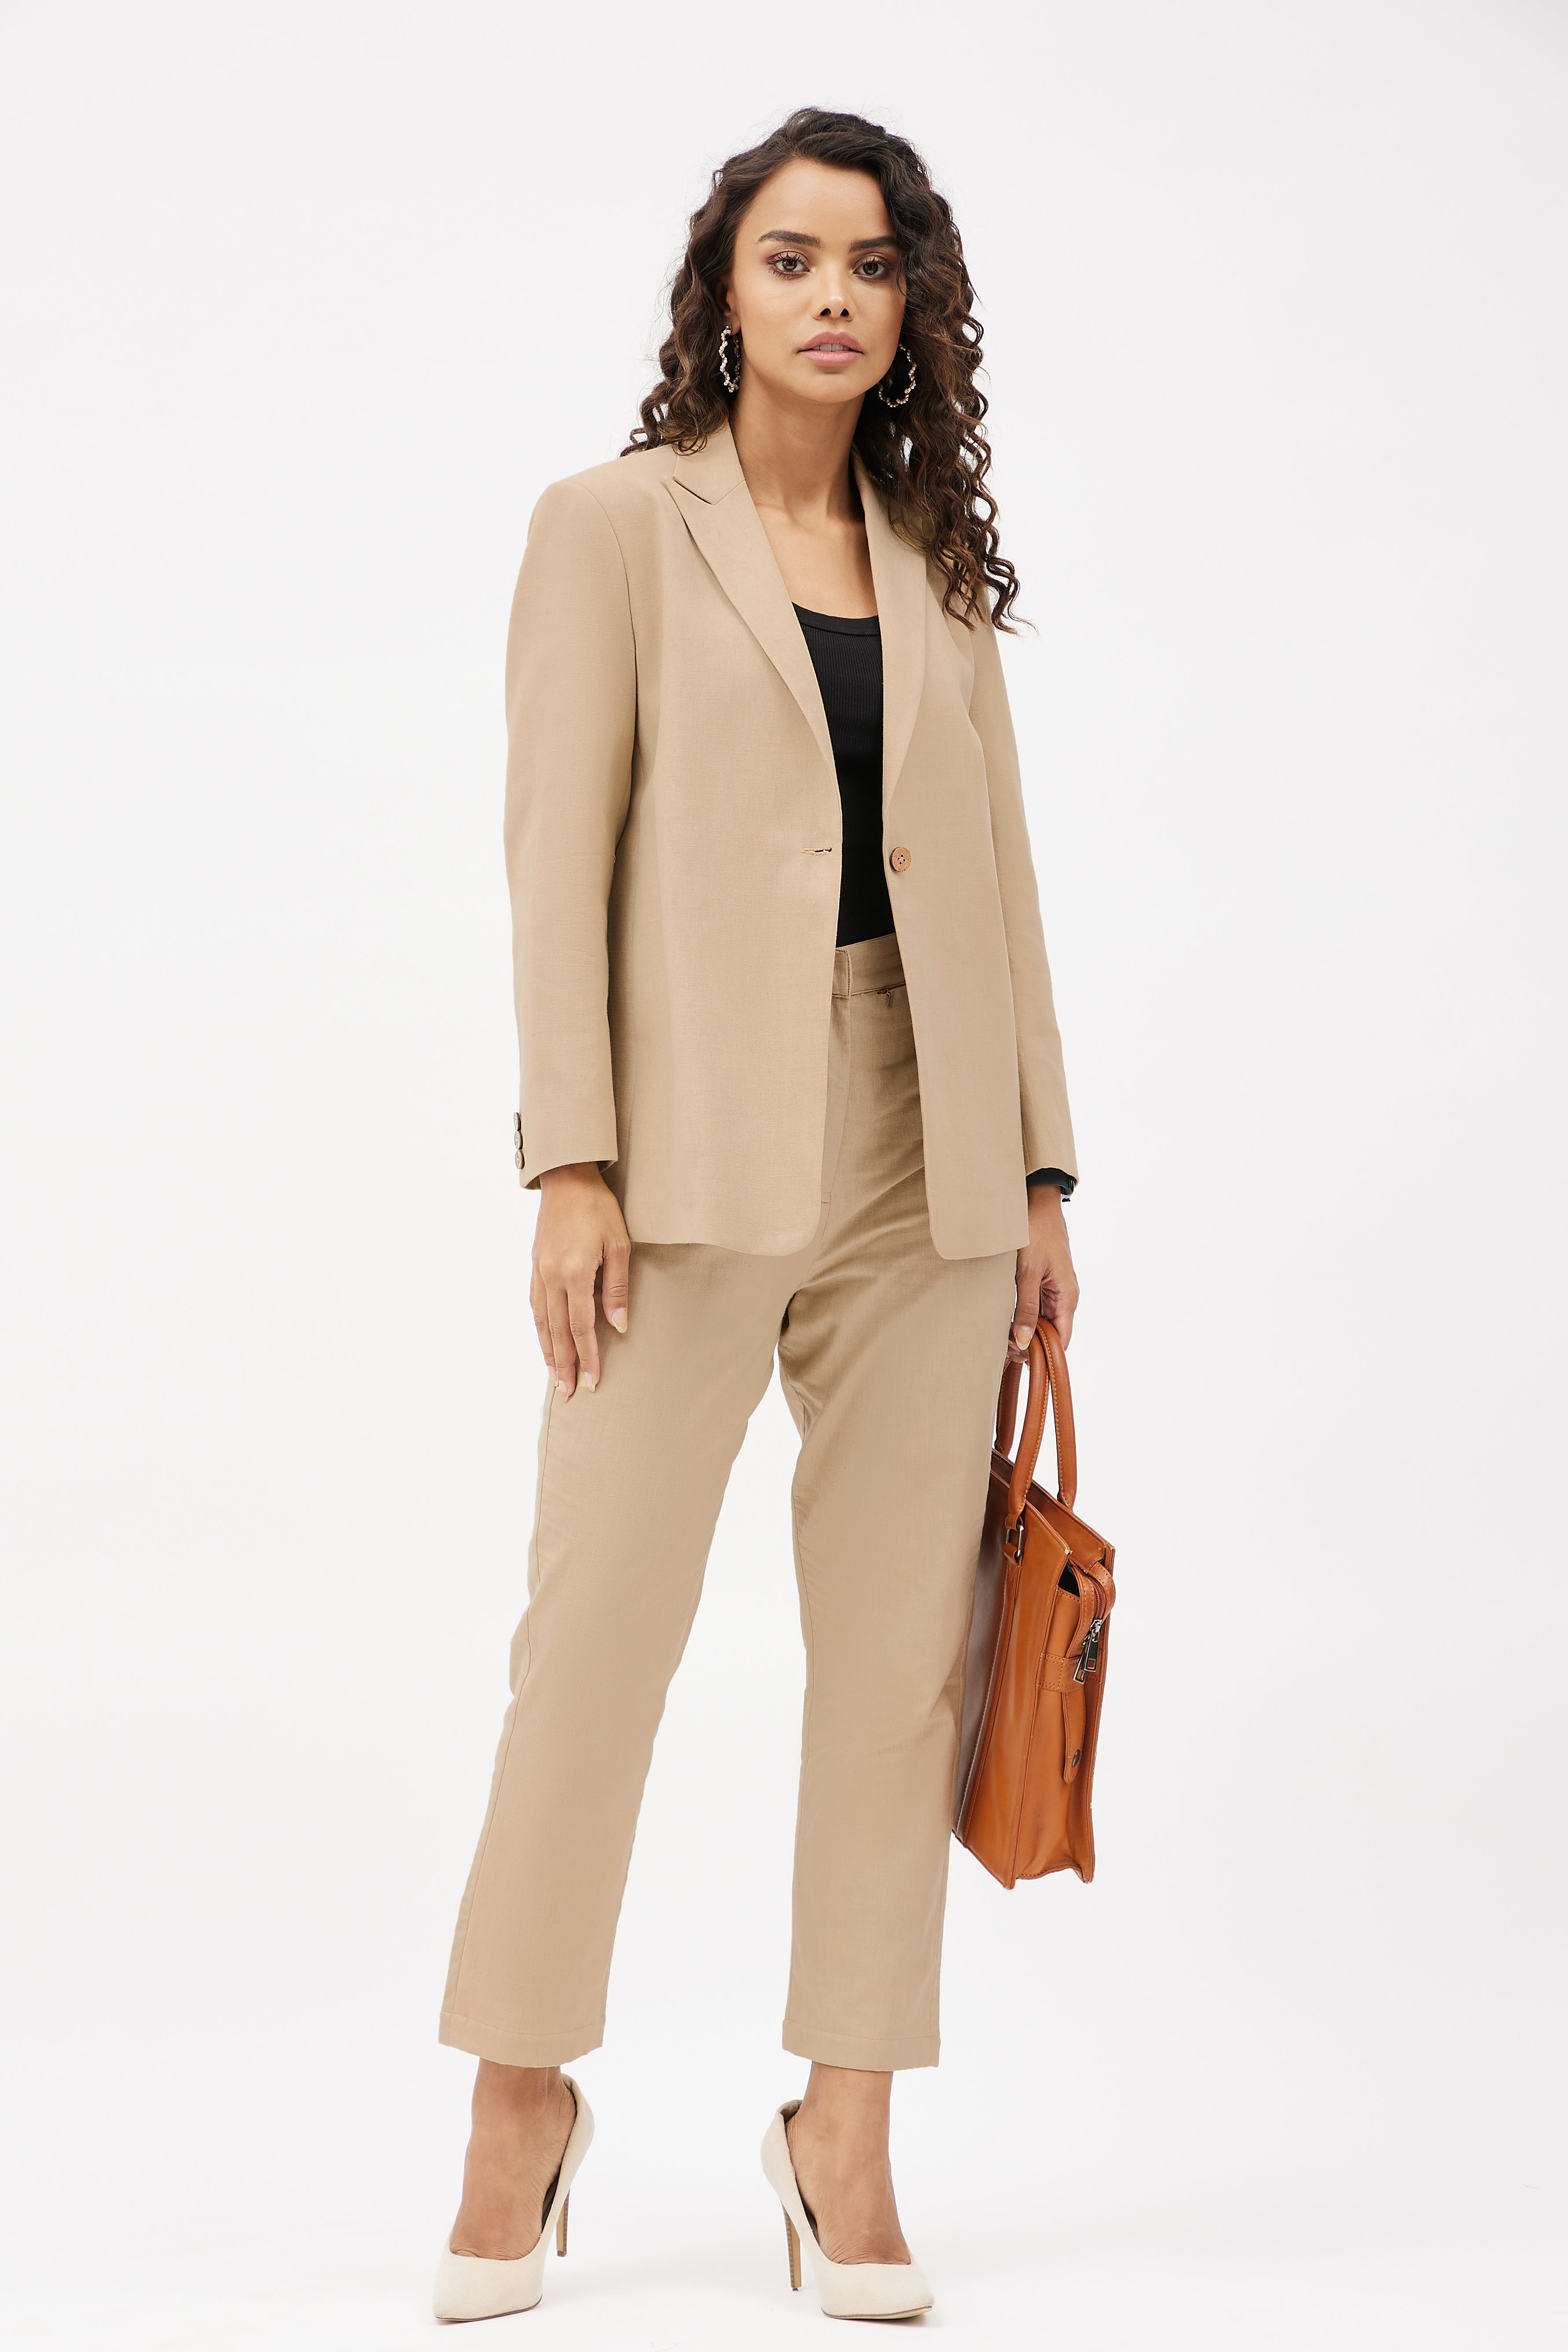 Formal Style Blazer And Trouser Business Suit Set  Stylesplash